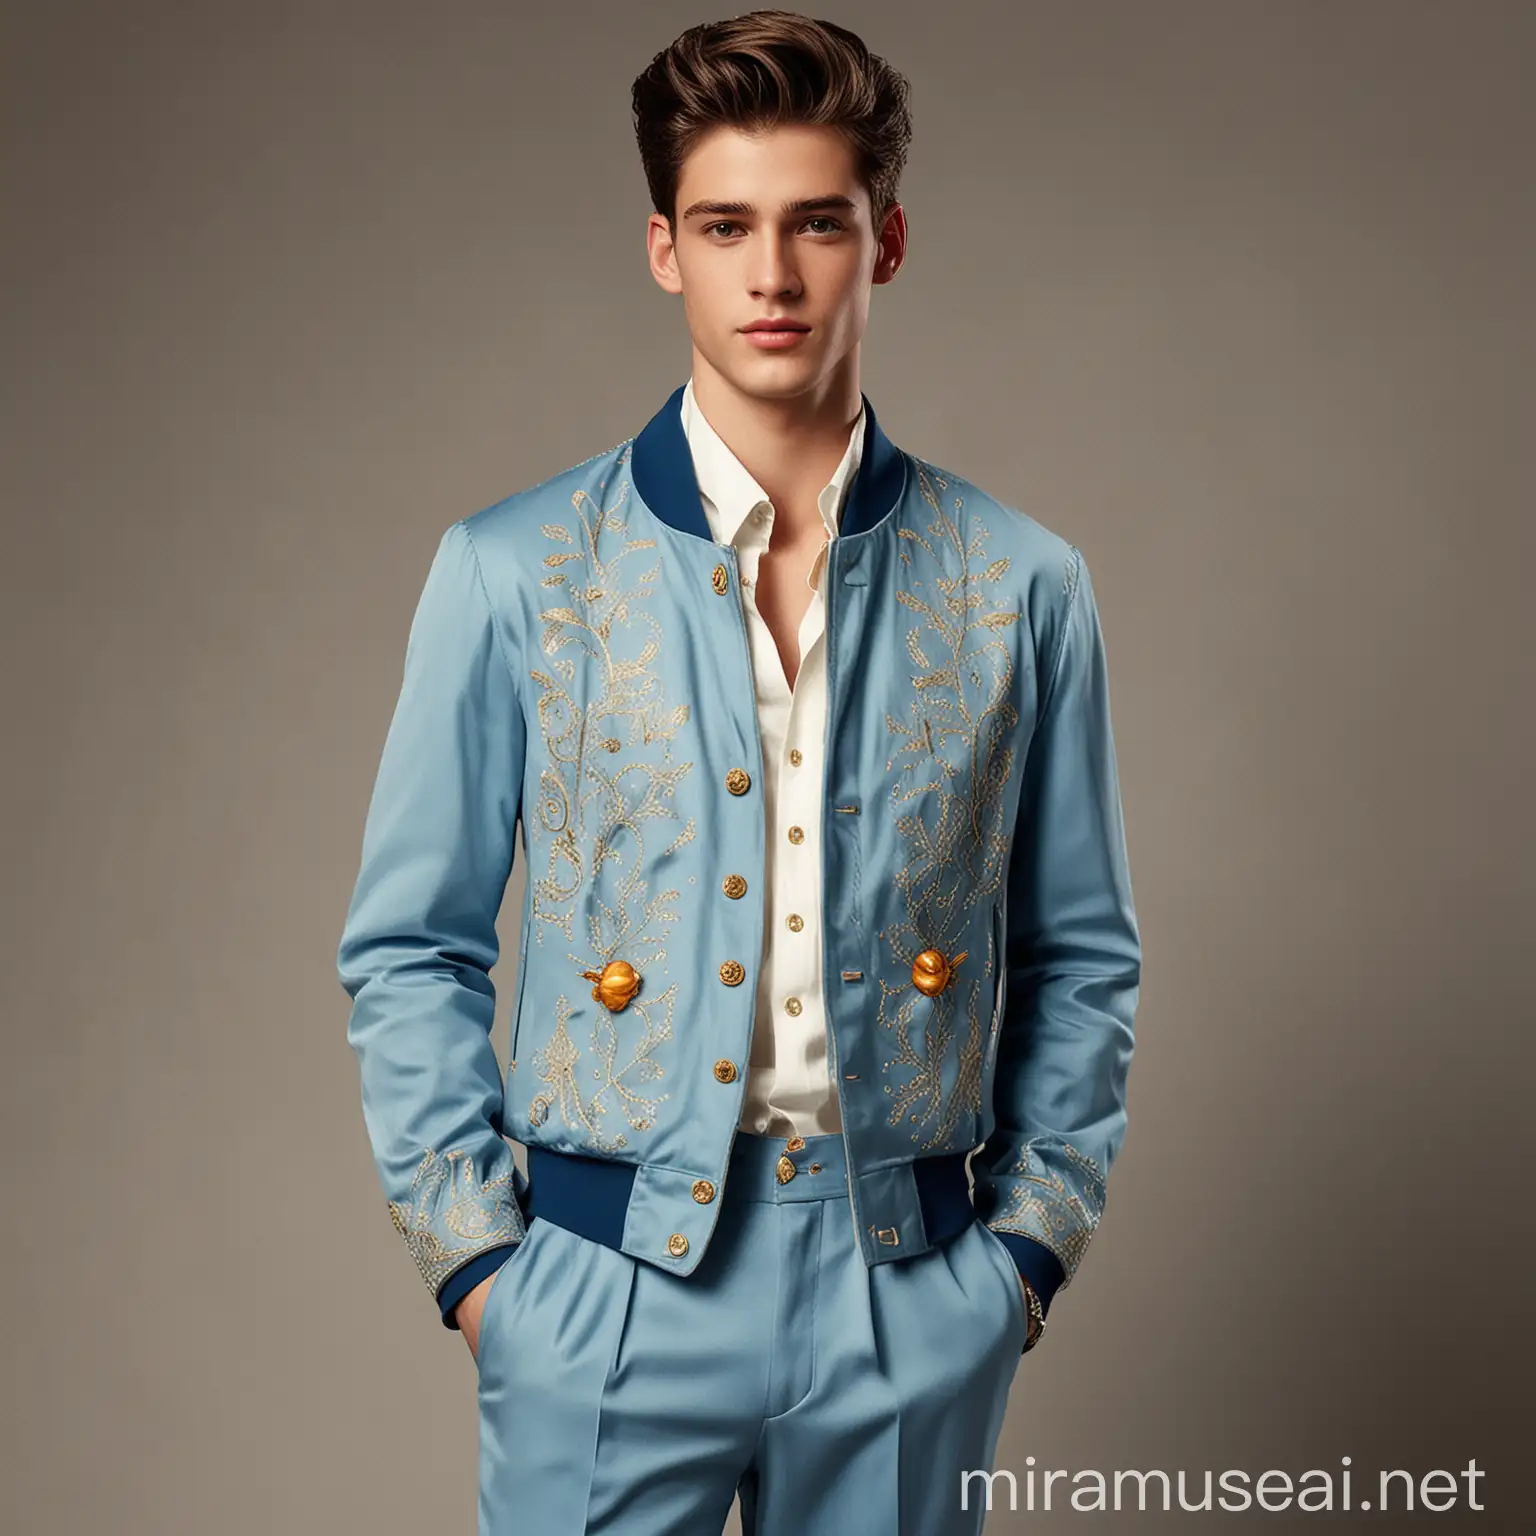 Modern Prince with Royal Heritage Blue and Gold FairyTale Fashion